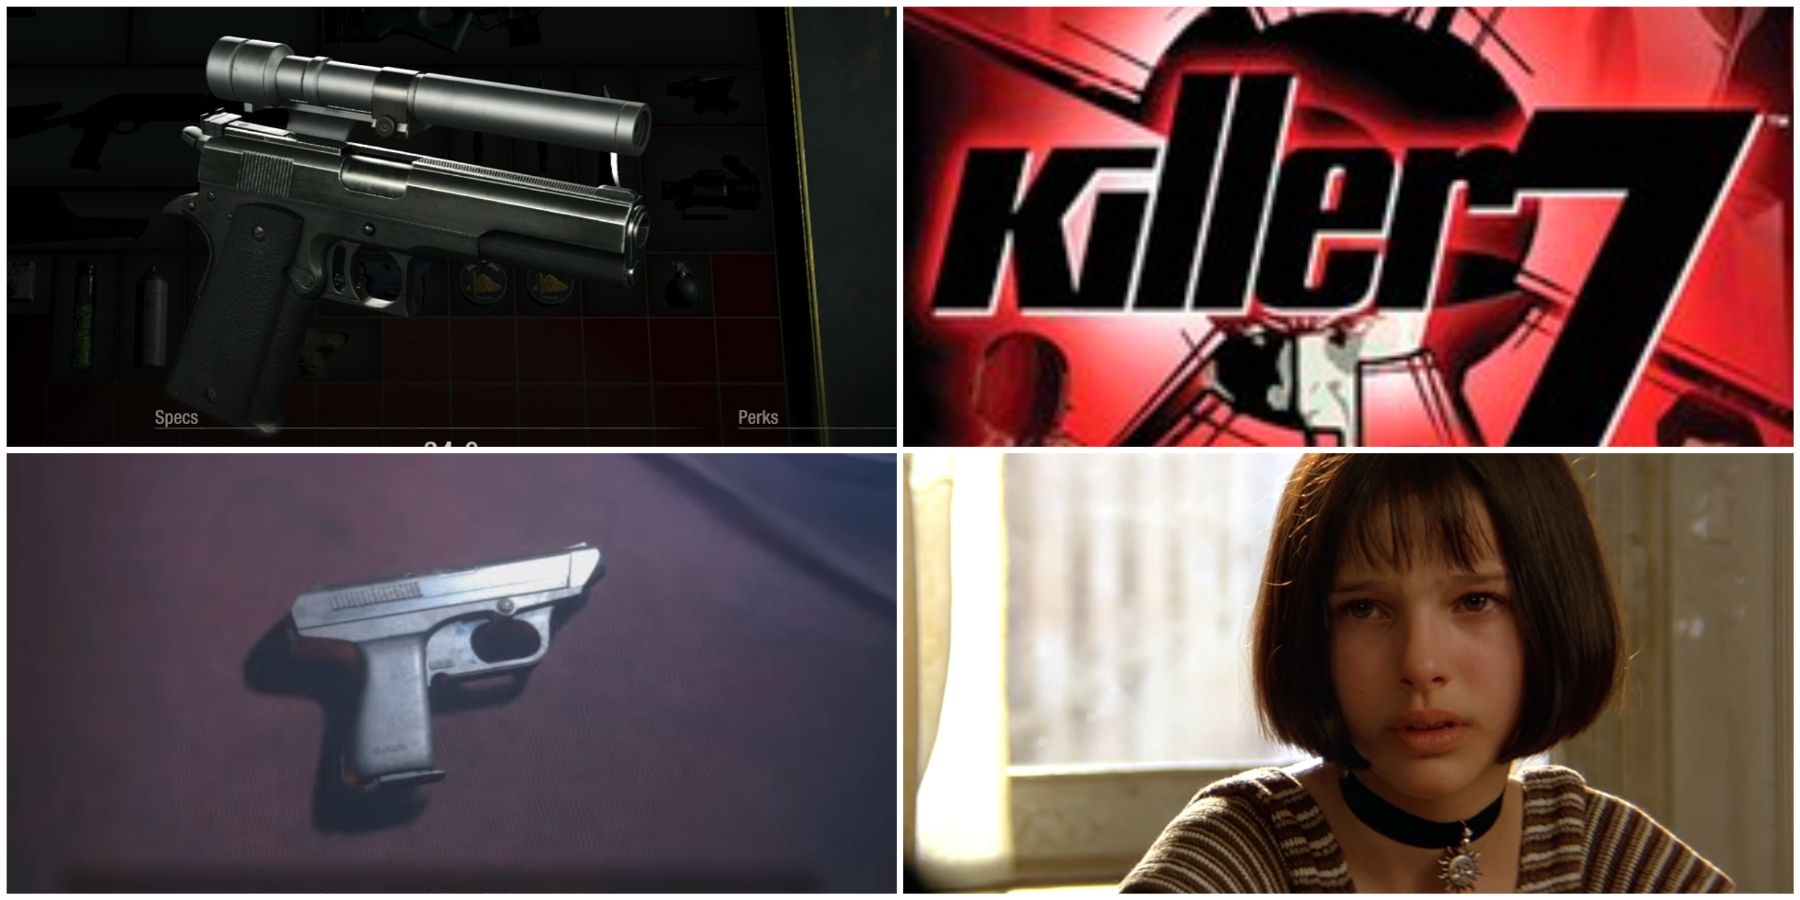 Killer7 and Matilda references from Resident Evil 4.